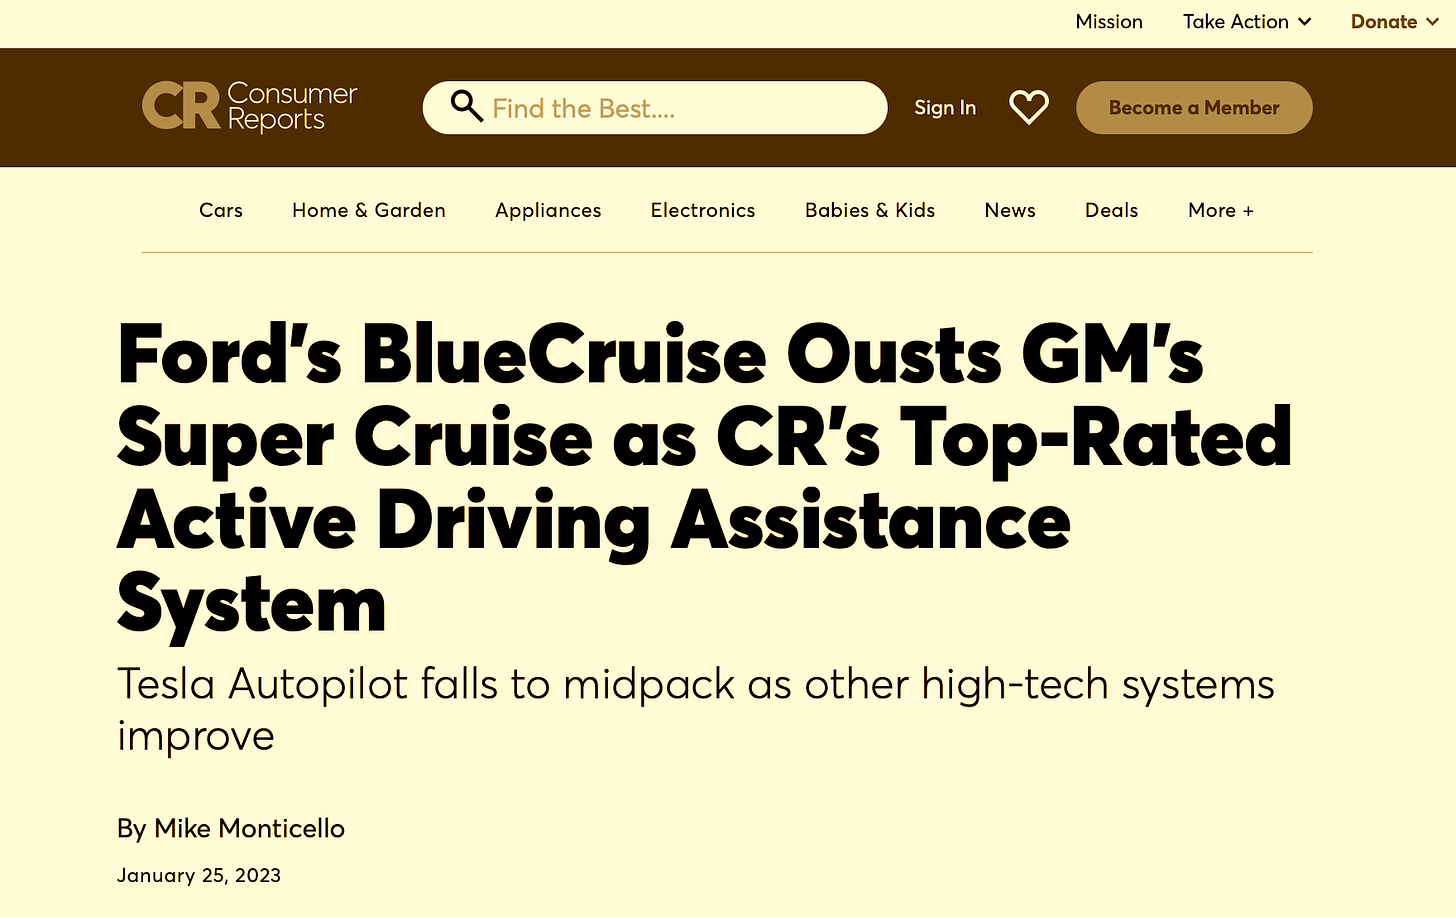 Ford’s BlueCruise Ousts GM’s Super Cruise as CR’s Top-Rated Active Driving Assistance System Tesla Autopilot falls to midpack as other high-tech systems improve